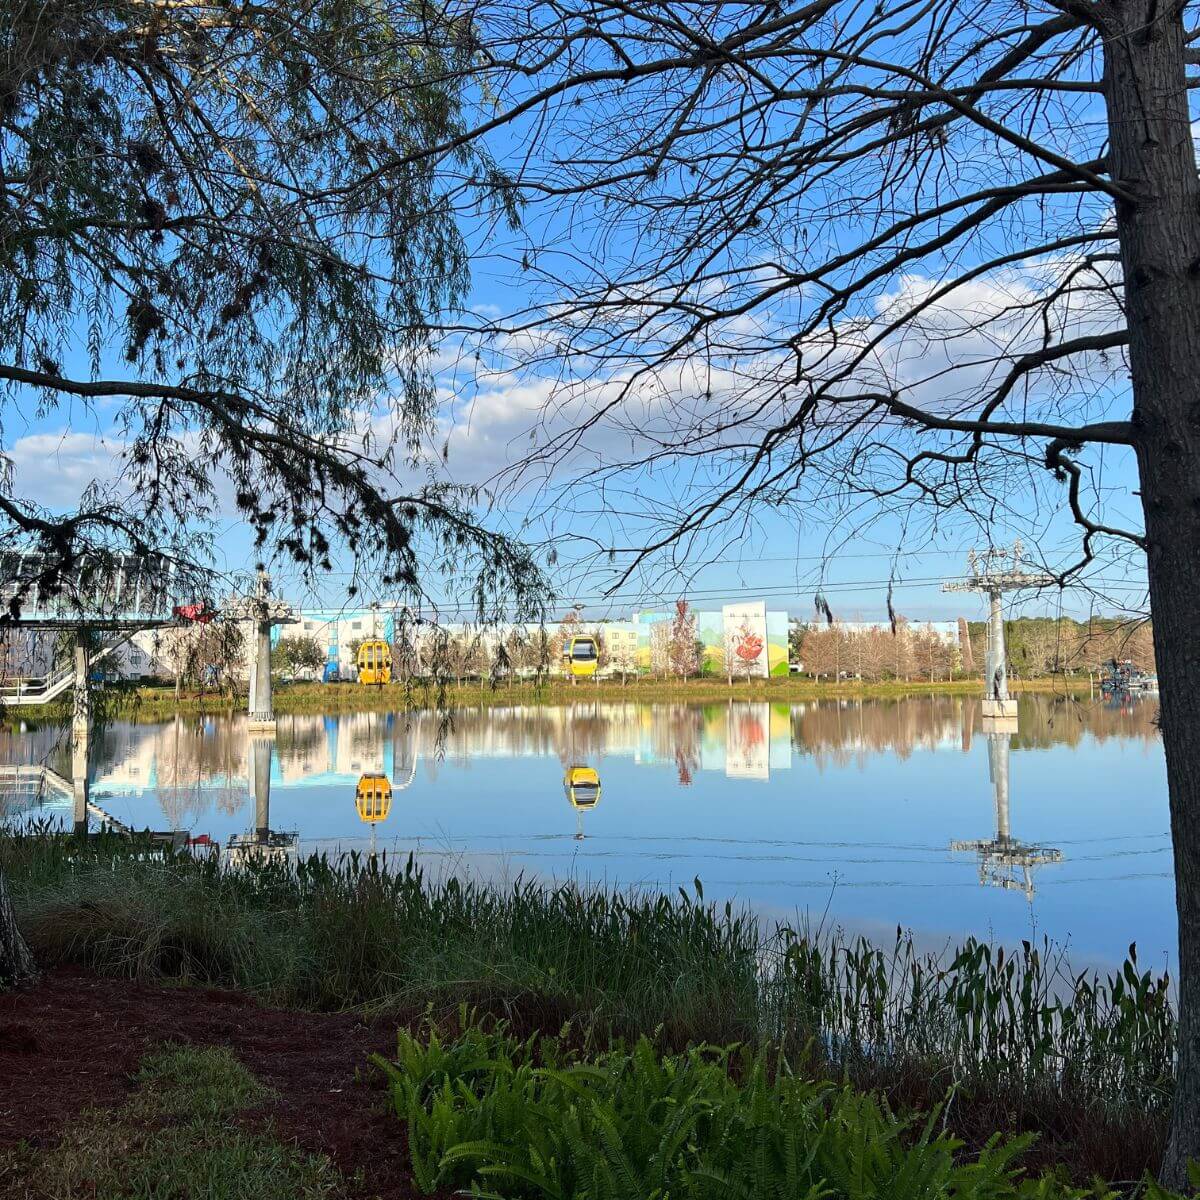 Photo of the Disney Skyliner over Hourglass Lake through trees from the Pop Century Resort.